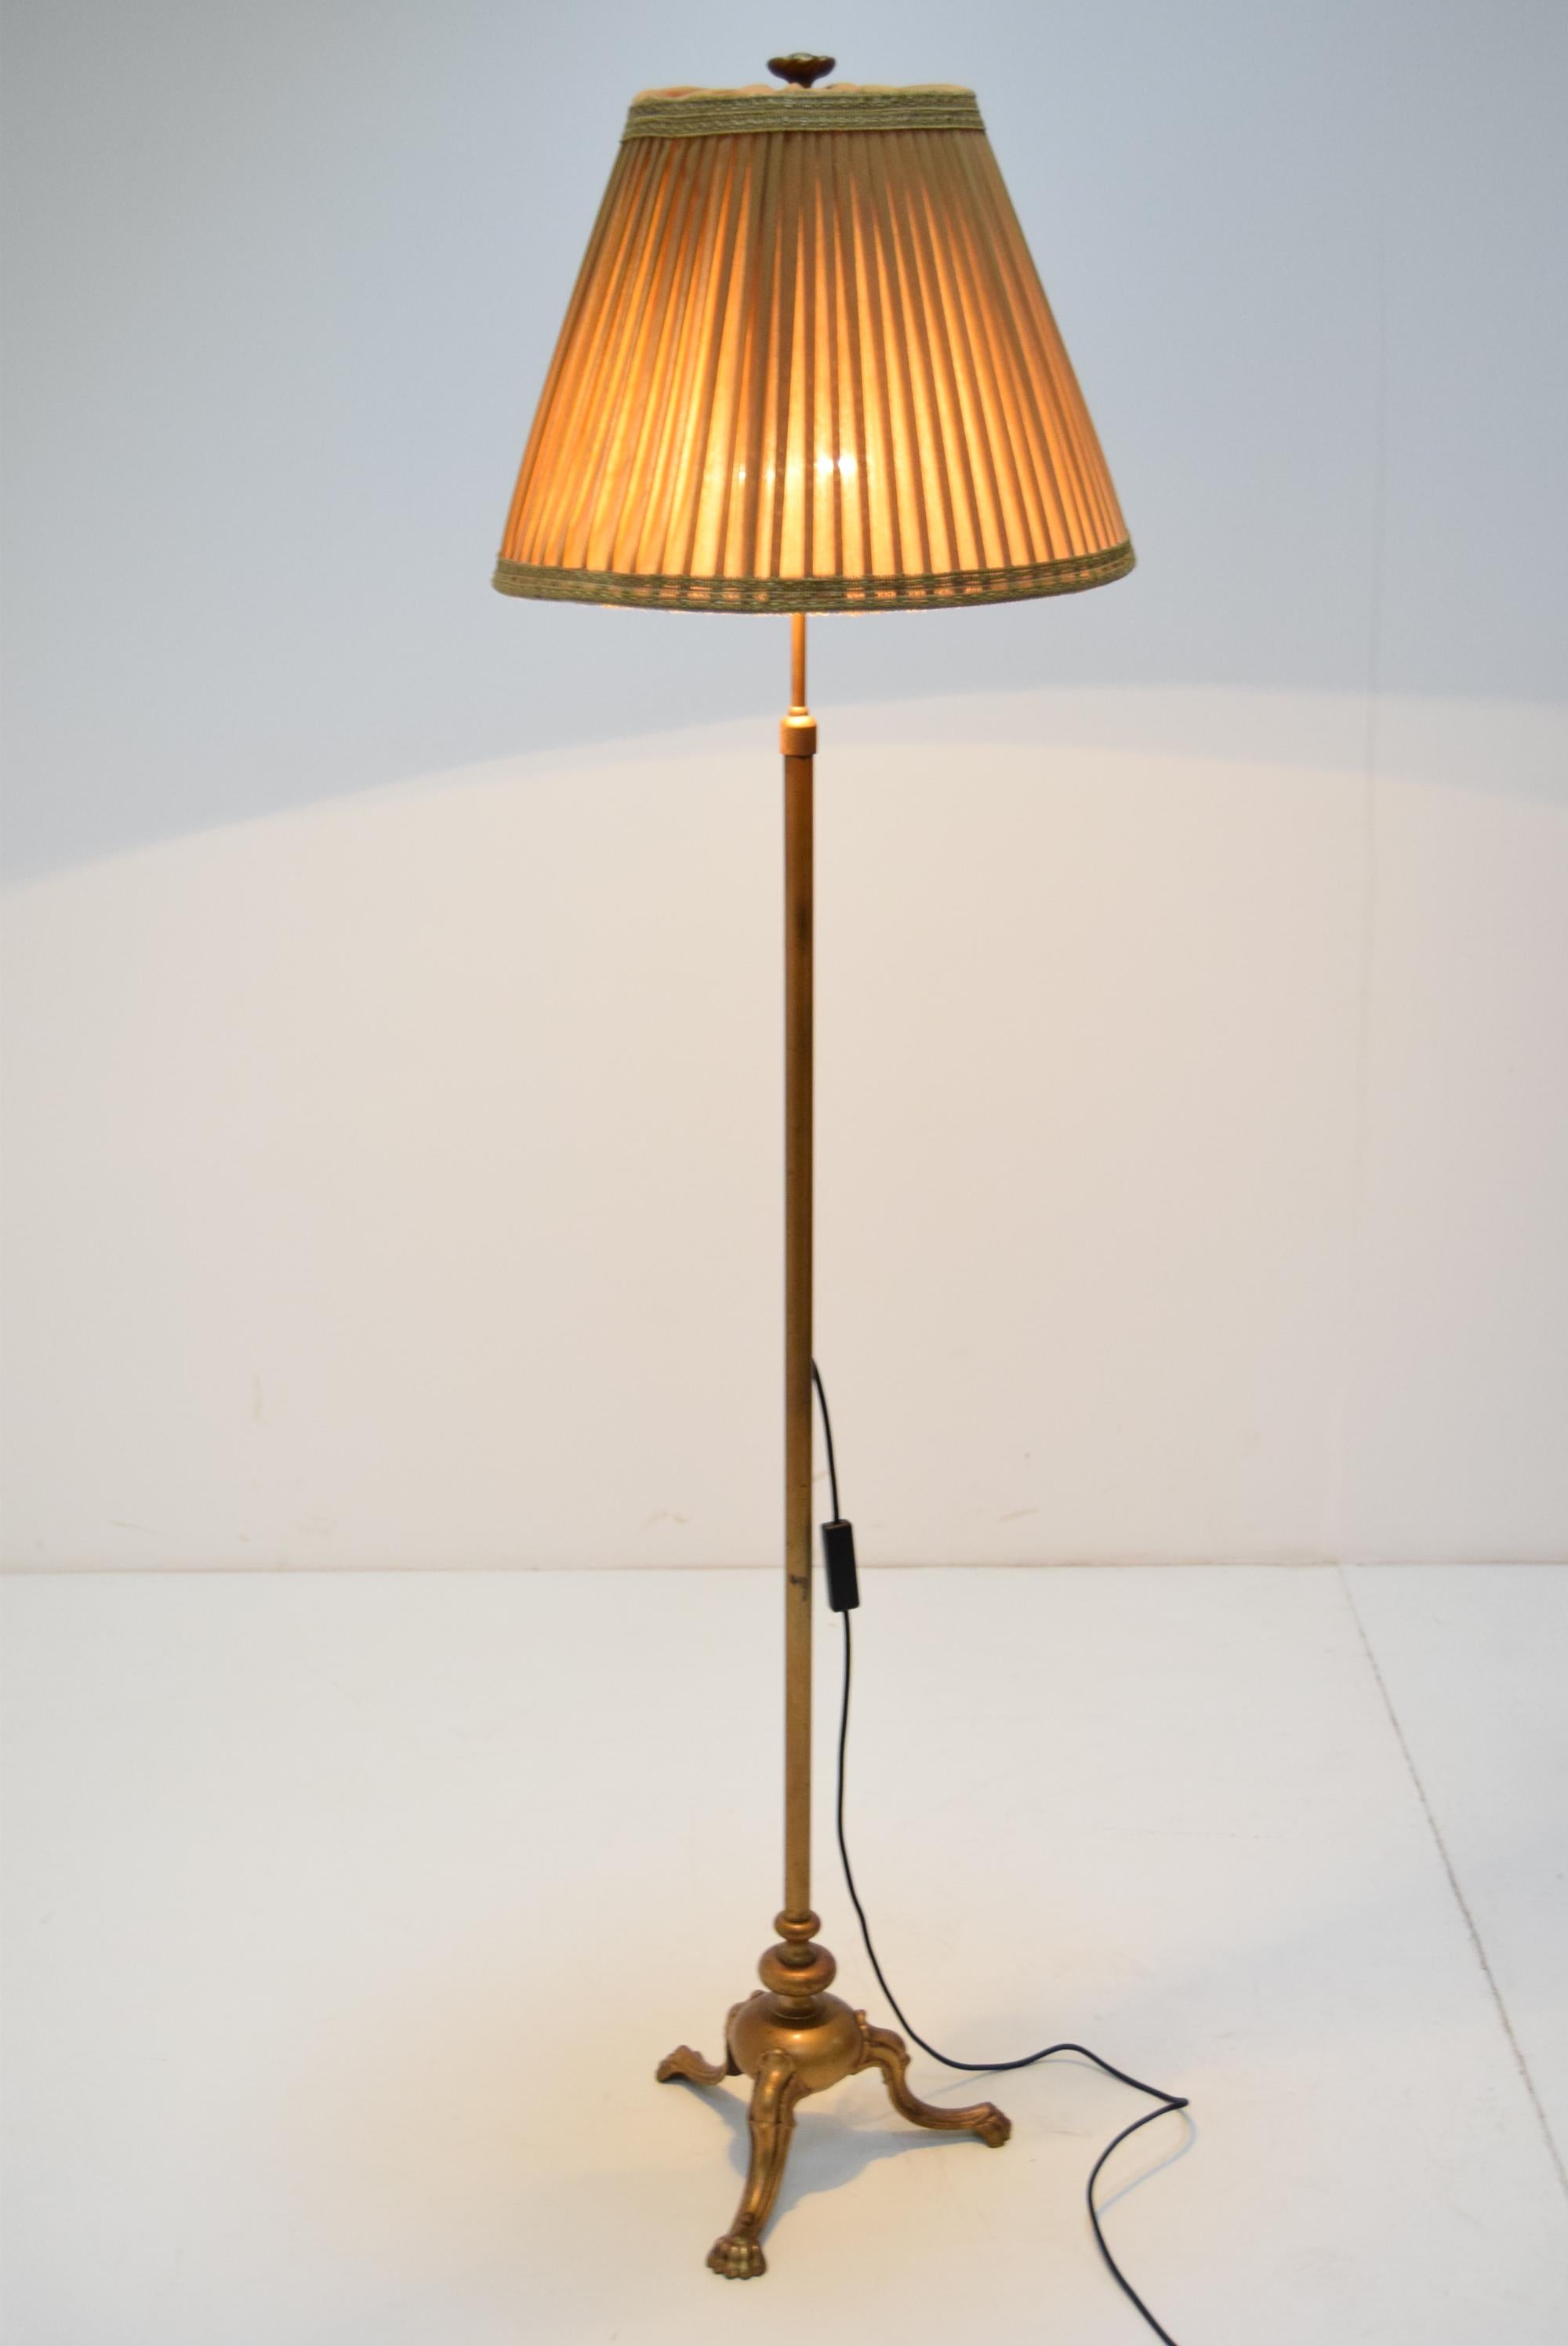 Made in Czechoslovakia
Made of brass, fabric
With aged patina
Lampshade haze signs of use
Fully functional
Original condition.